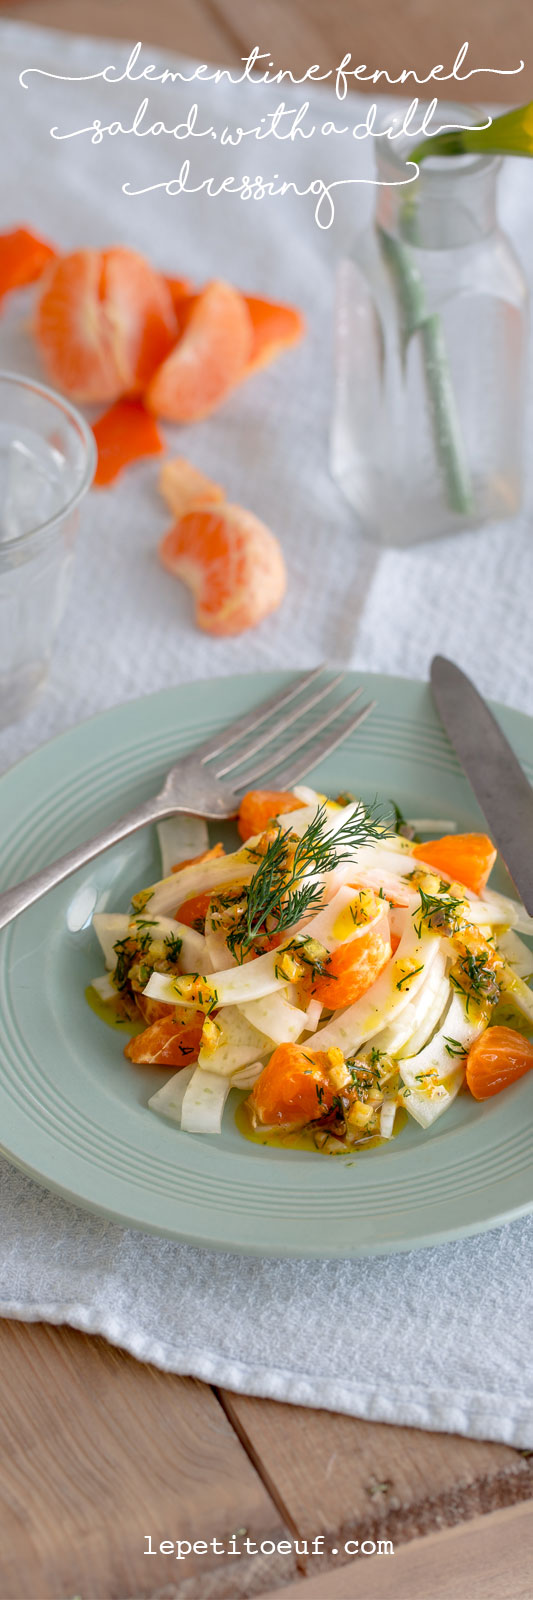 Clementine and fennel salad with a citrussy dill dressing, a light, sweet side salad with the zesty overtones of clementine and the uniquely aromatic flavour of dill, which pairs beautifully with citrus flavours. Anise-scented fennel is the ideal vegetable to base this salad upon, bumping it up to a full sized, slaw-esque side salad. Perfectly suited to light summer dinners, shared lunches, picnics or alongside fish. It’s vegetarian and vegan as well, plus dairy free so perfect for most diets.  